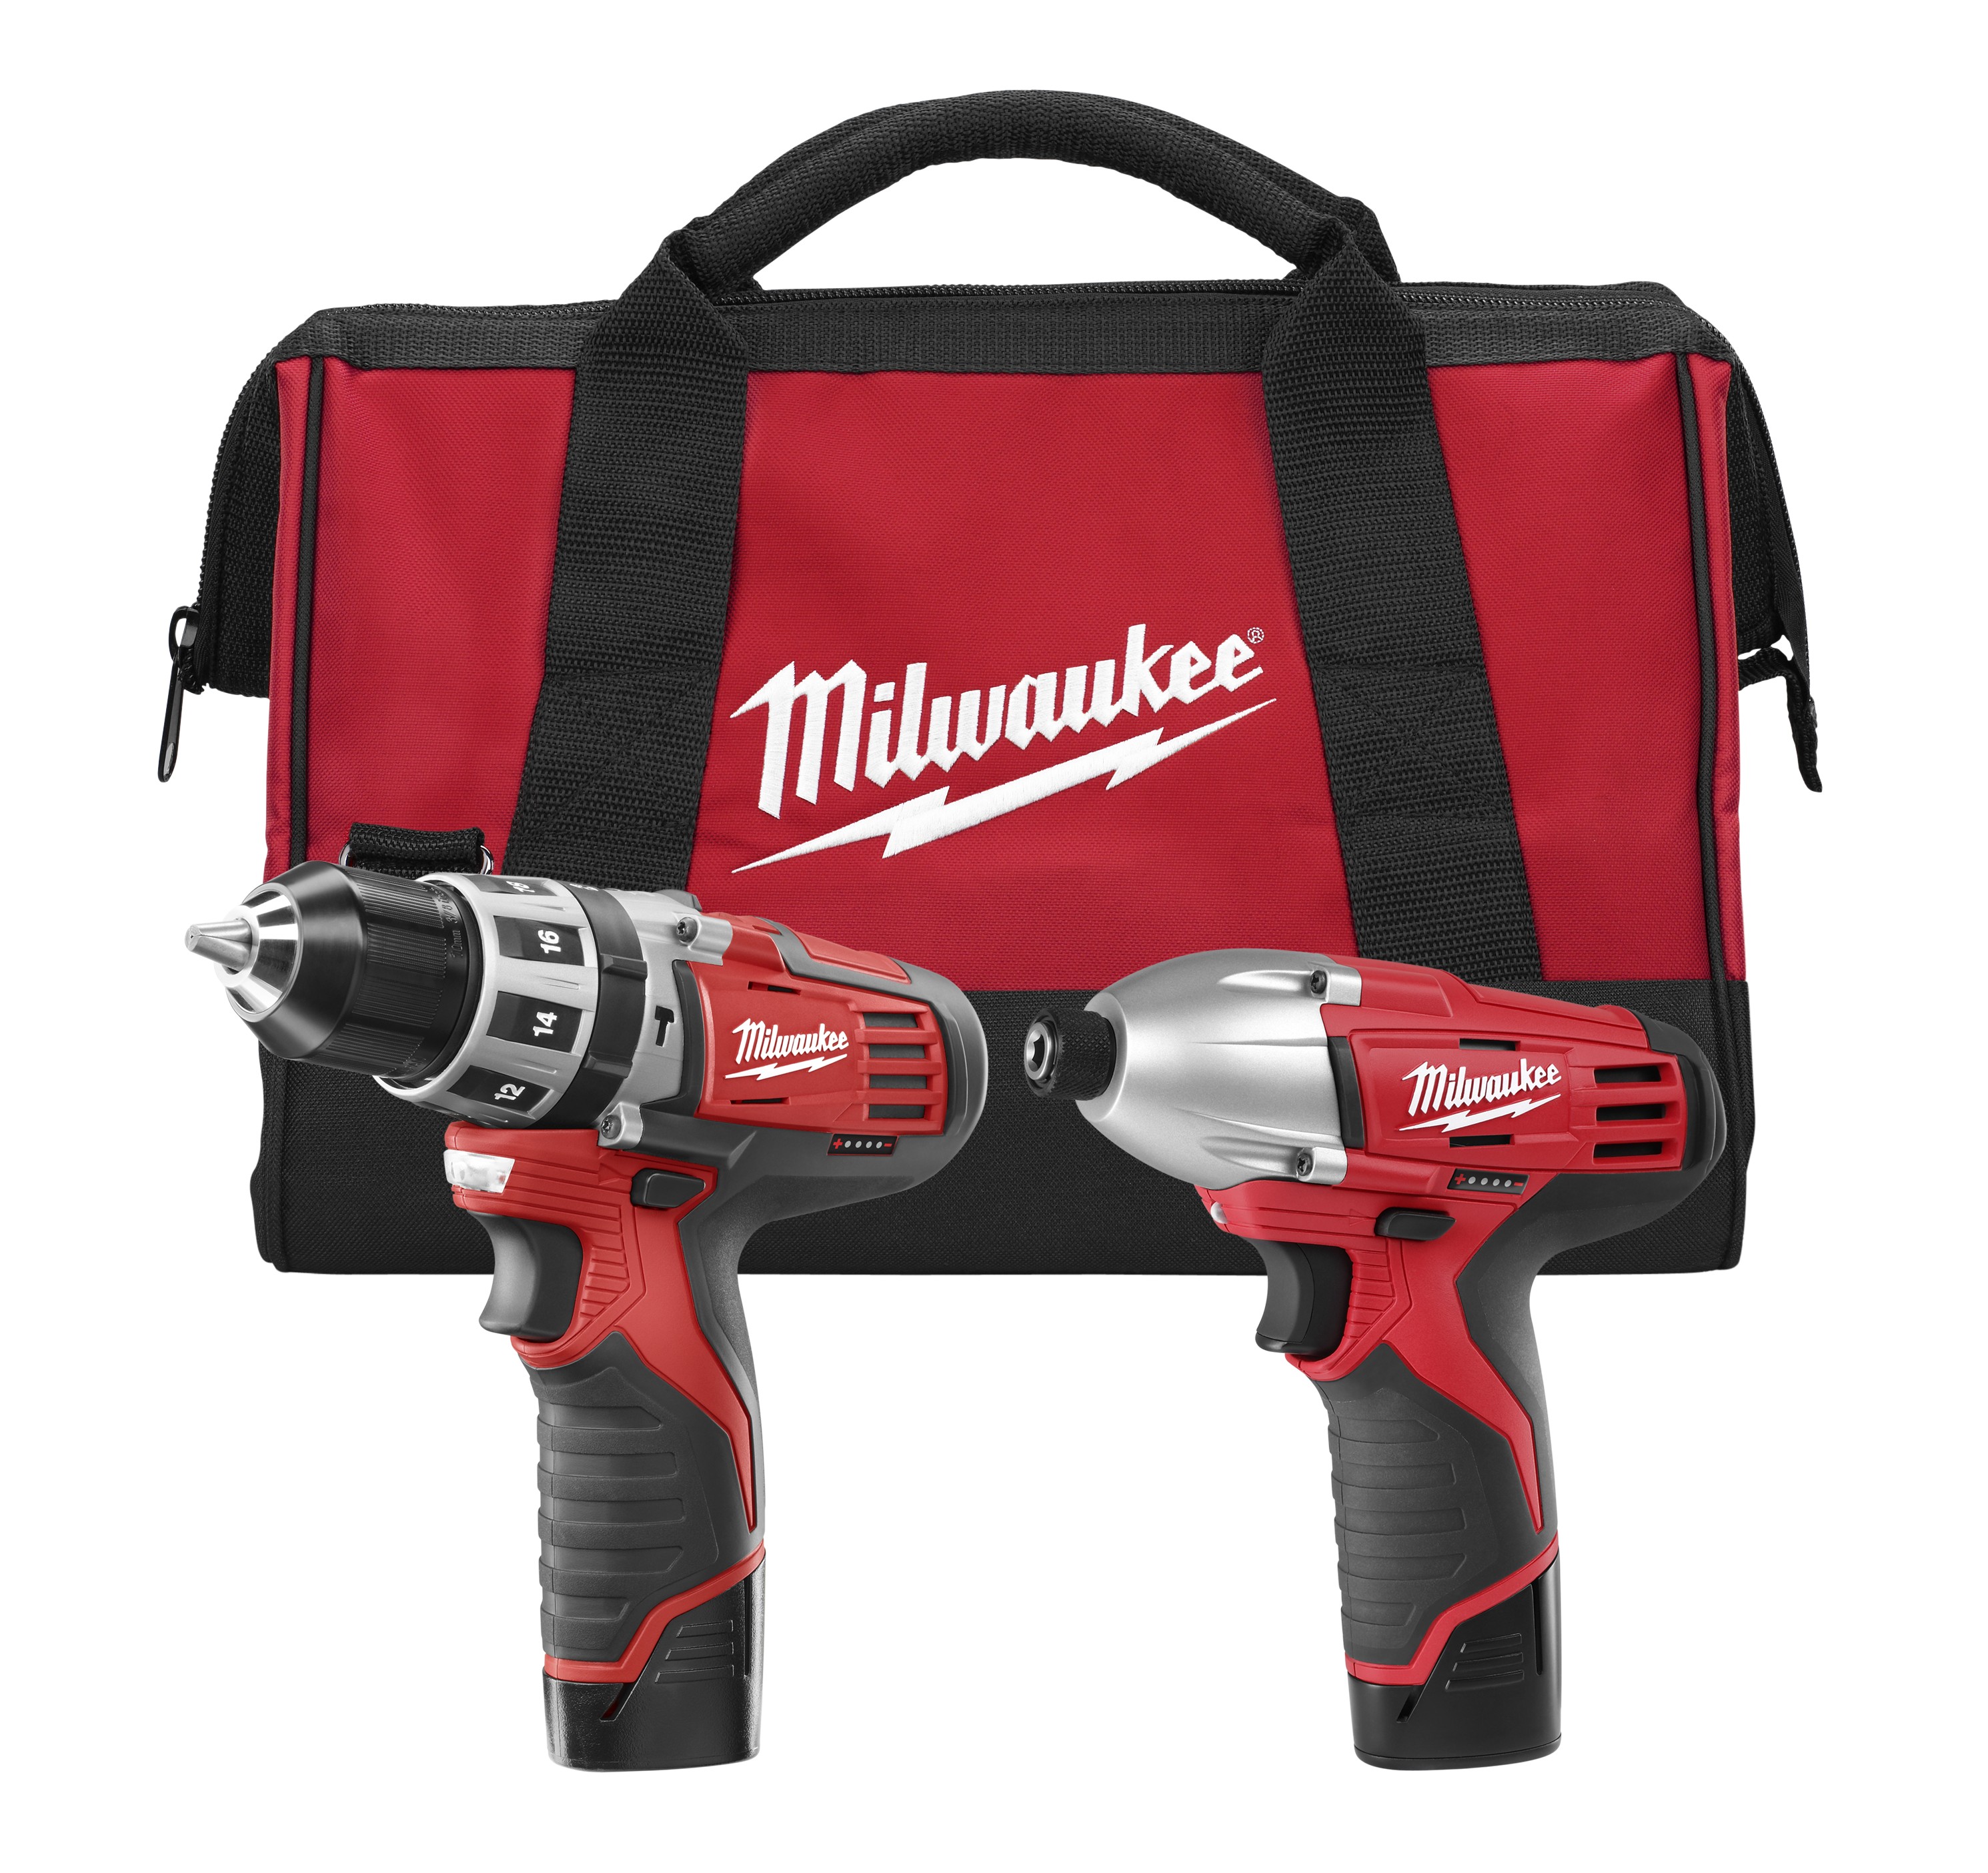 M12 12 Volt Lithium Ion Cordless 3/8 in. Hammer Drill/Driver and Impact Driver Combo Kit - 2 Tool